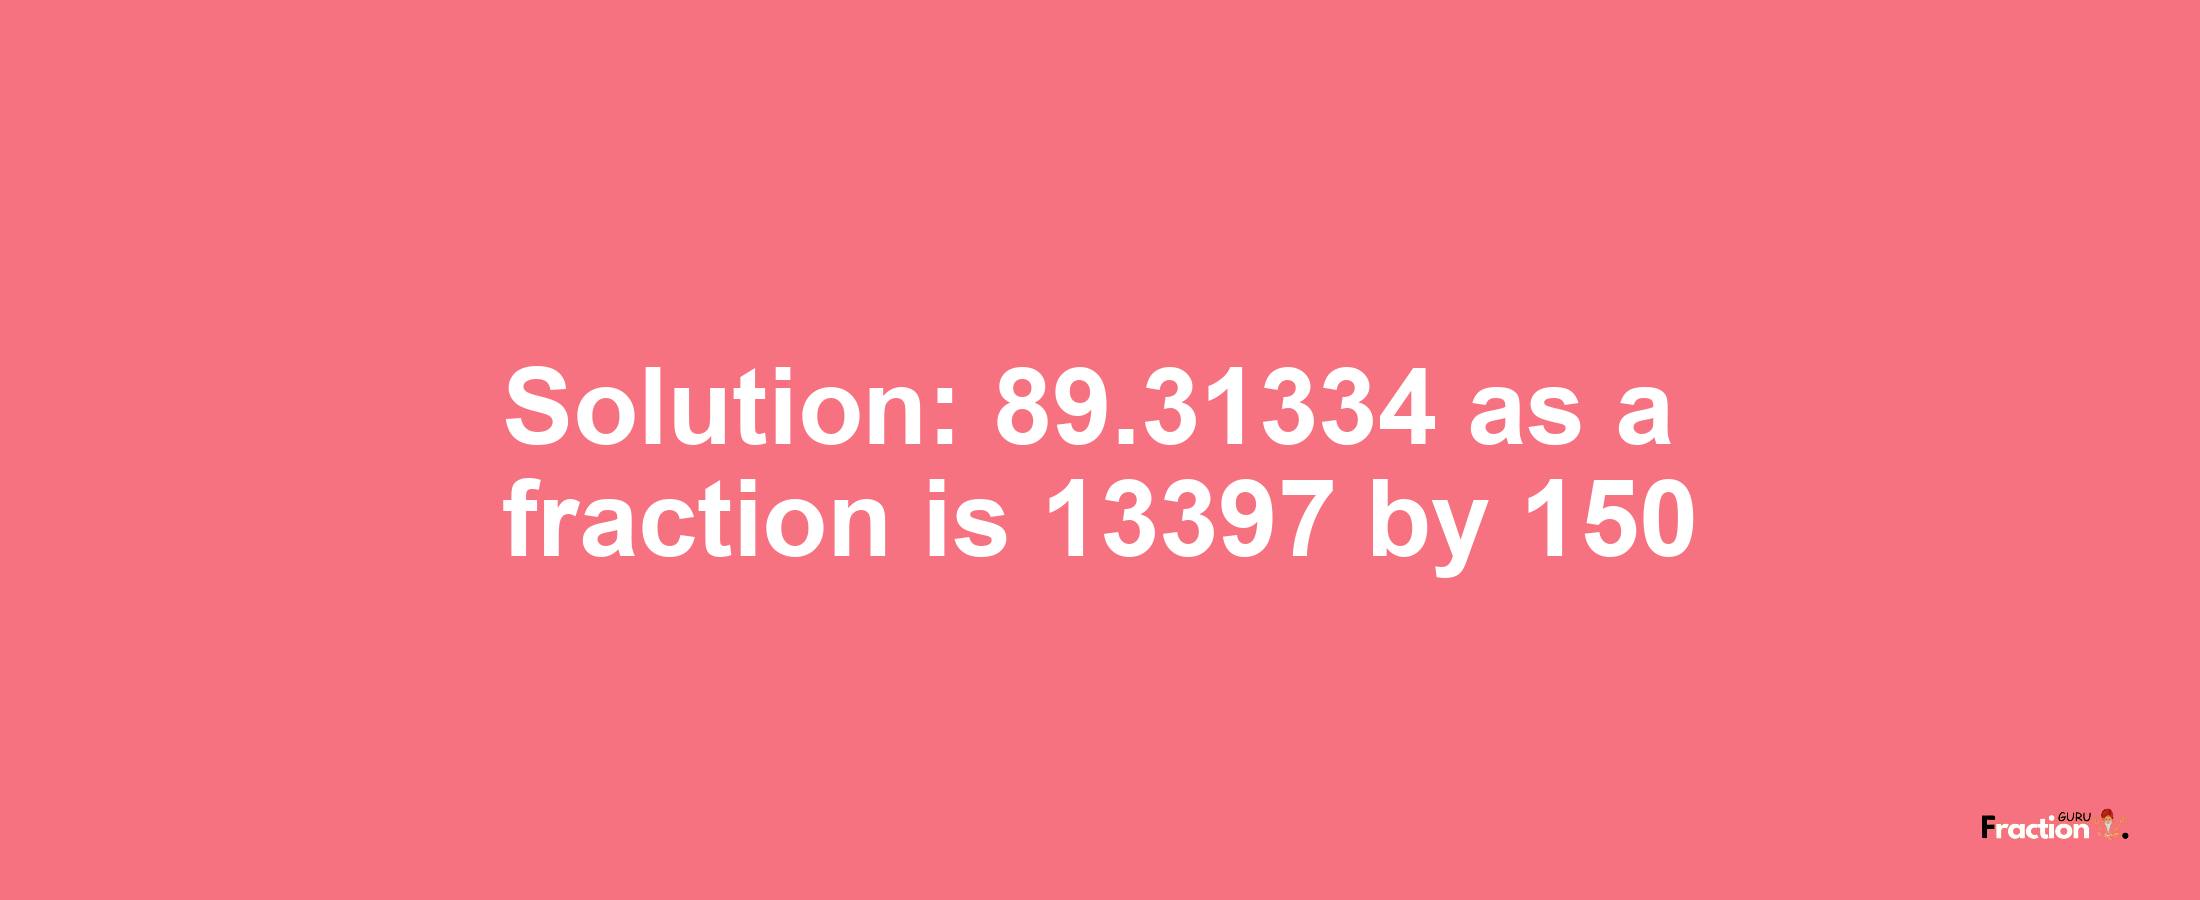 Solution:89.31334 as a fraction is 13397/150